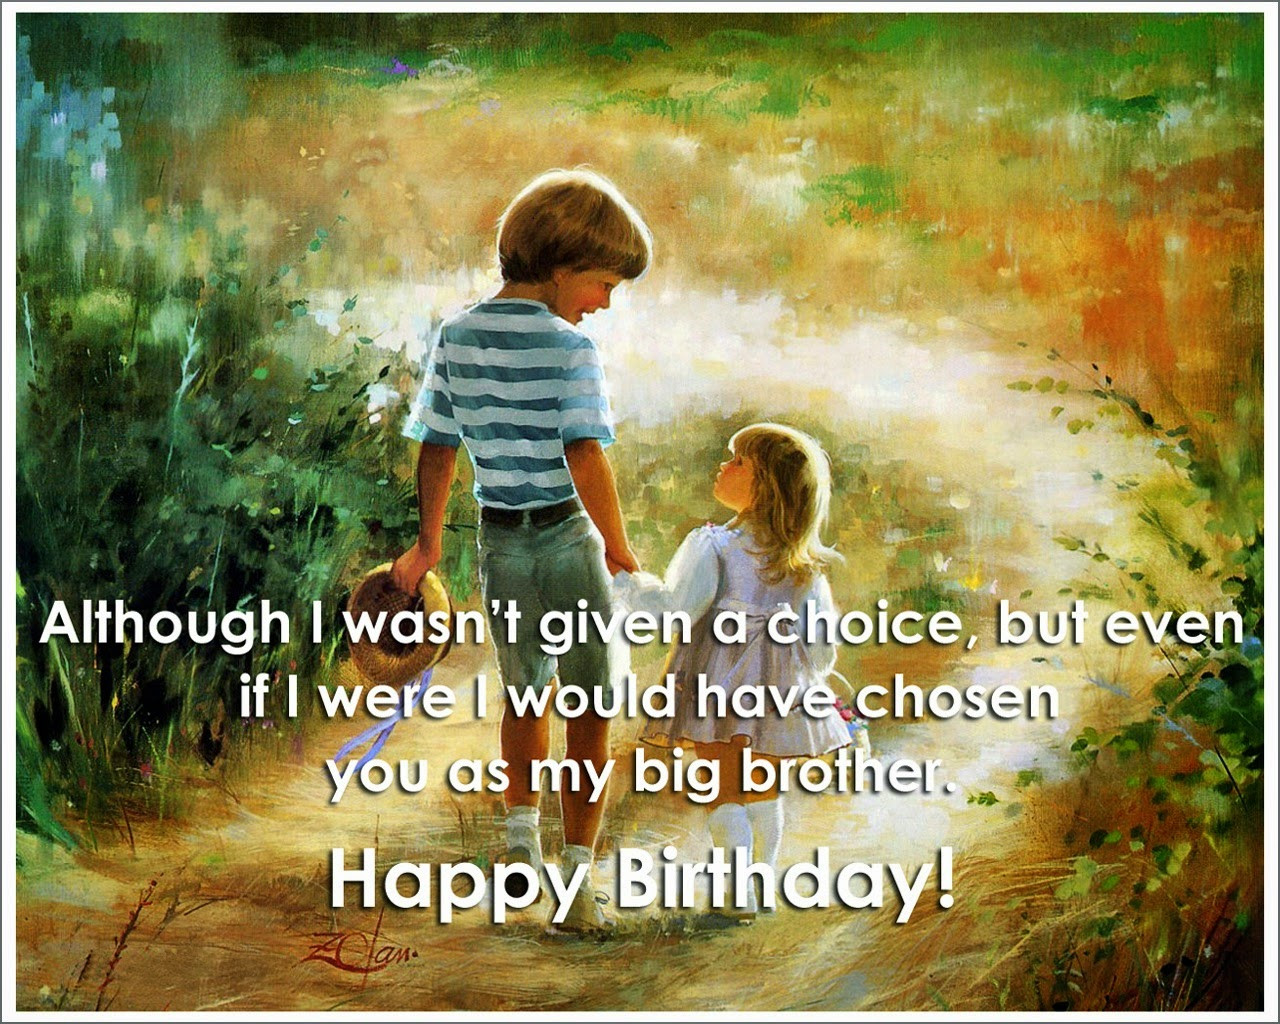 Happy Birthday Cards For Brother
 100 Happy Birthday Wishes to Send